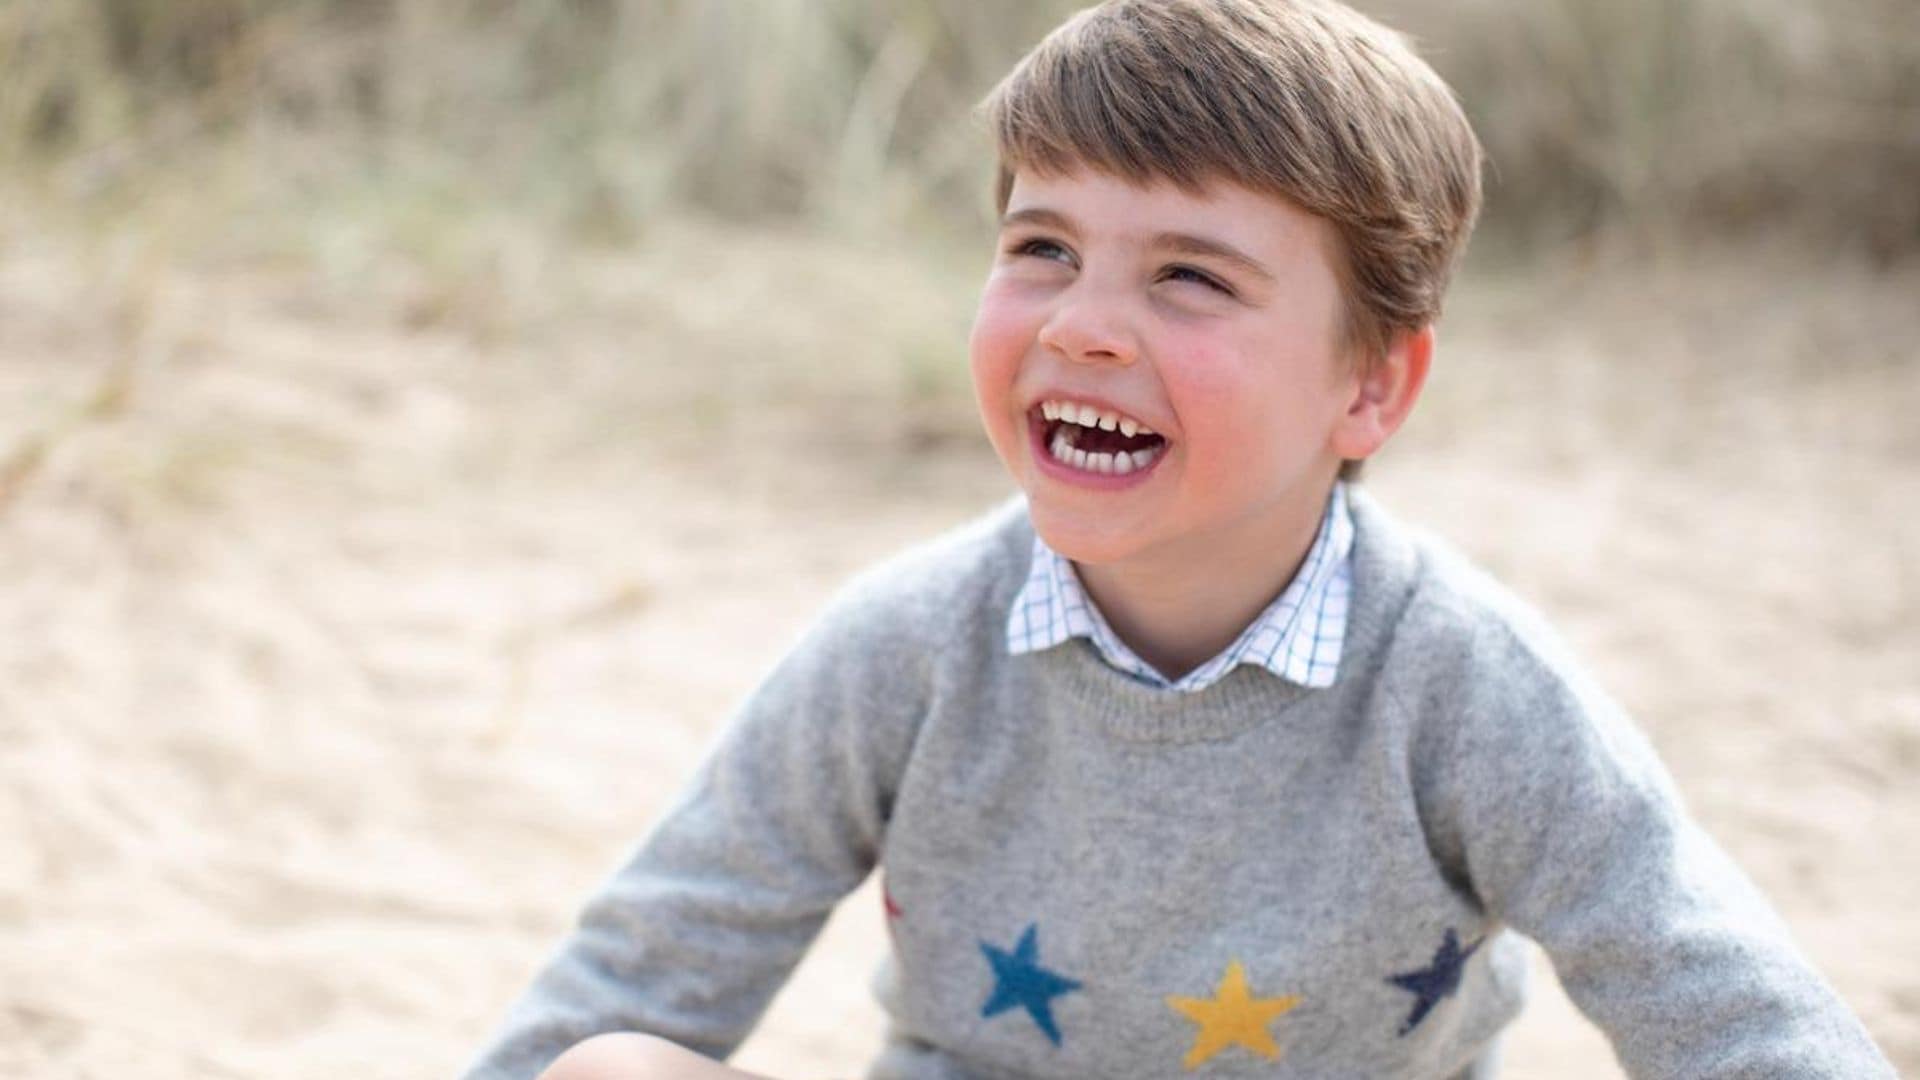 Barefoot at the beach! Prince Louis stars in new adorable photos for his 4th birthday